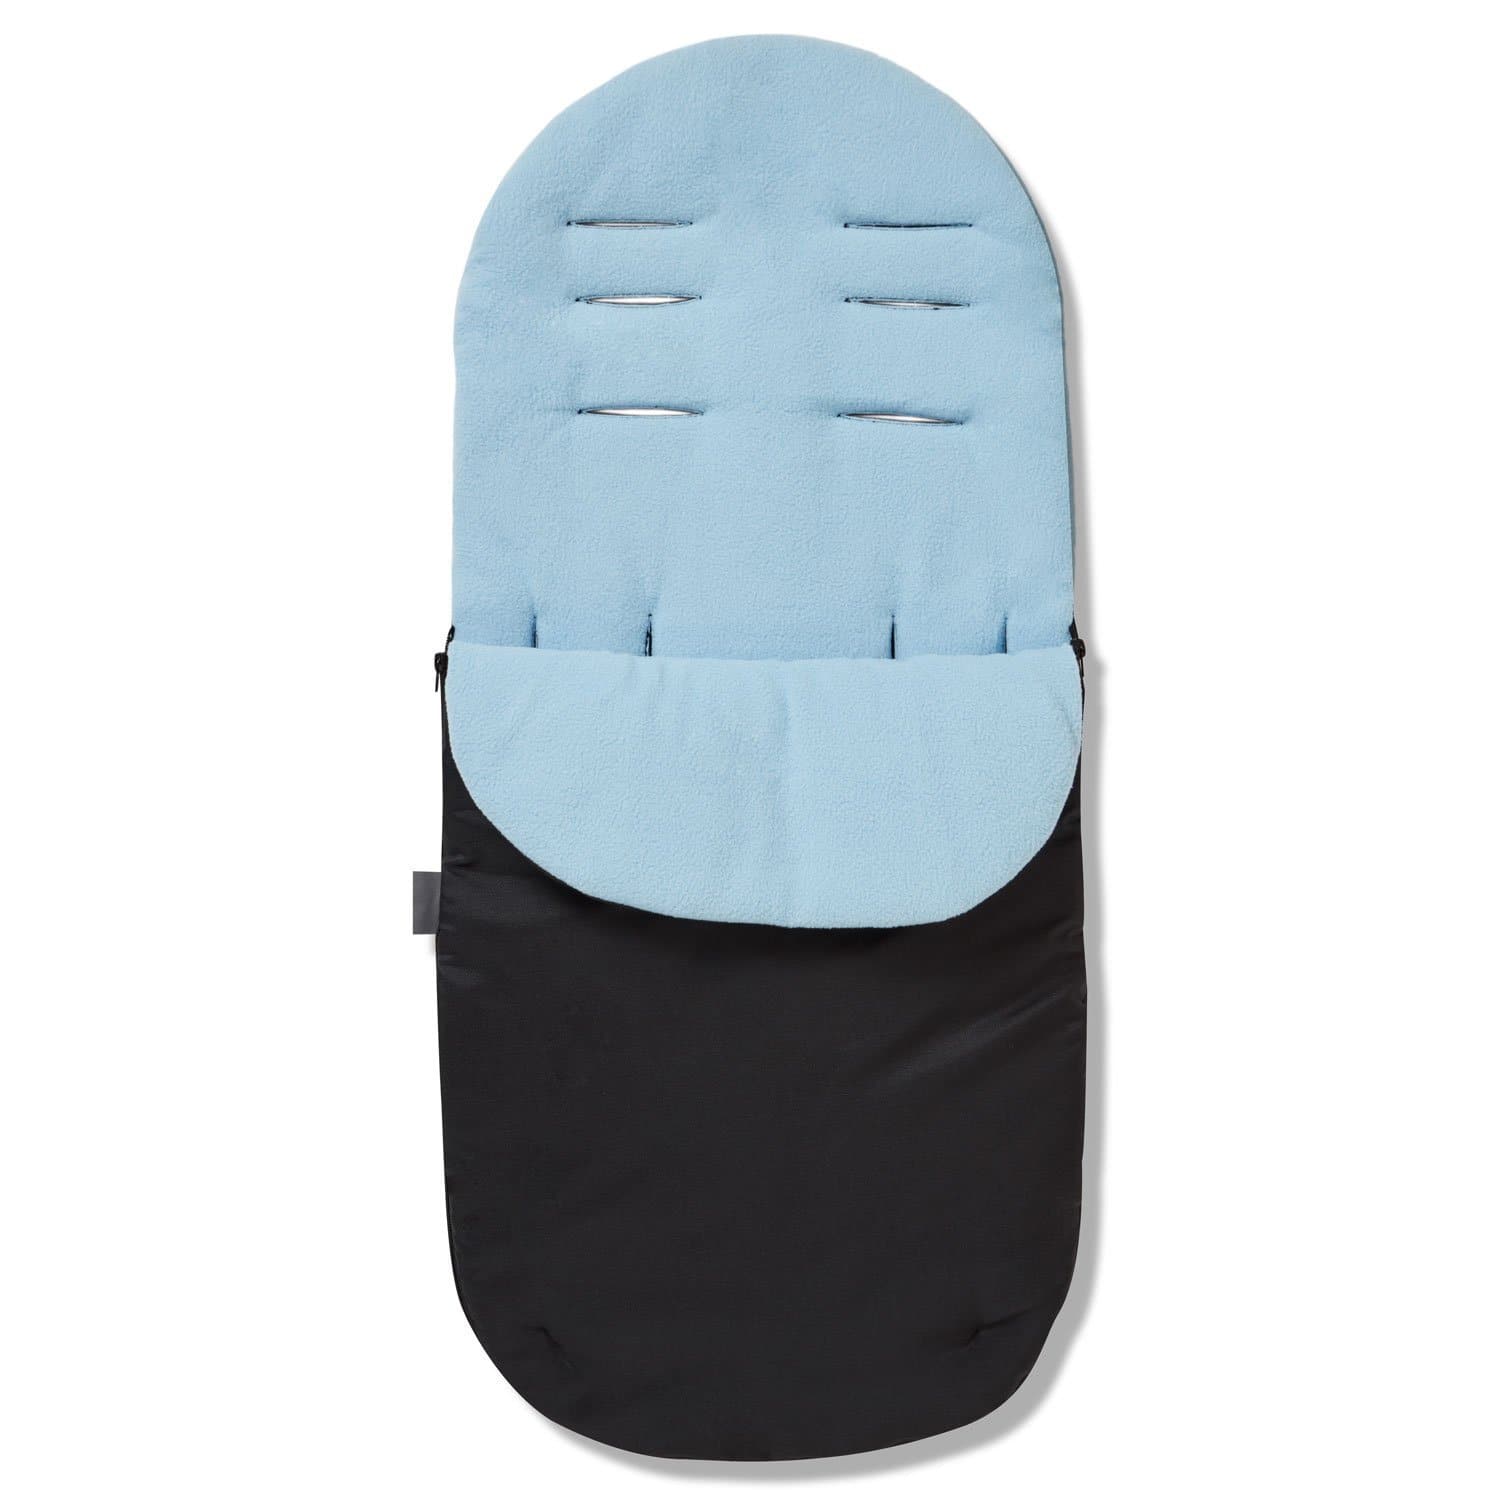 Footmuff / Cosy Toes Compatible with Urban Detour - Light Blue / Fits All Models | For Your Little One